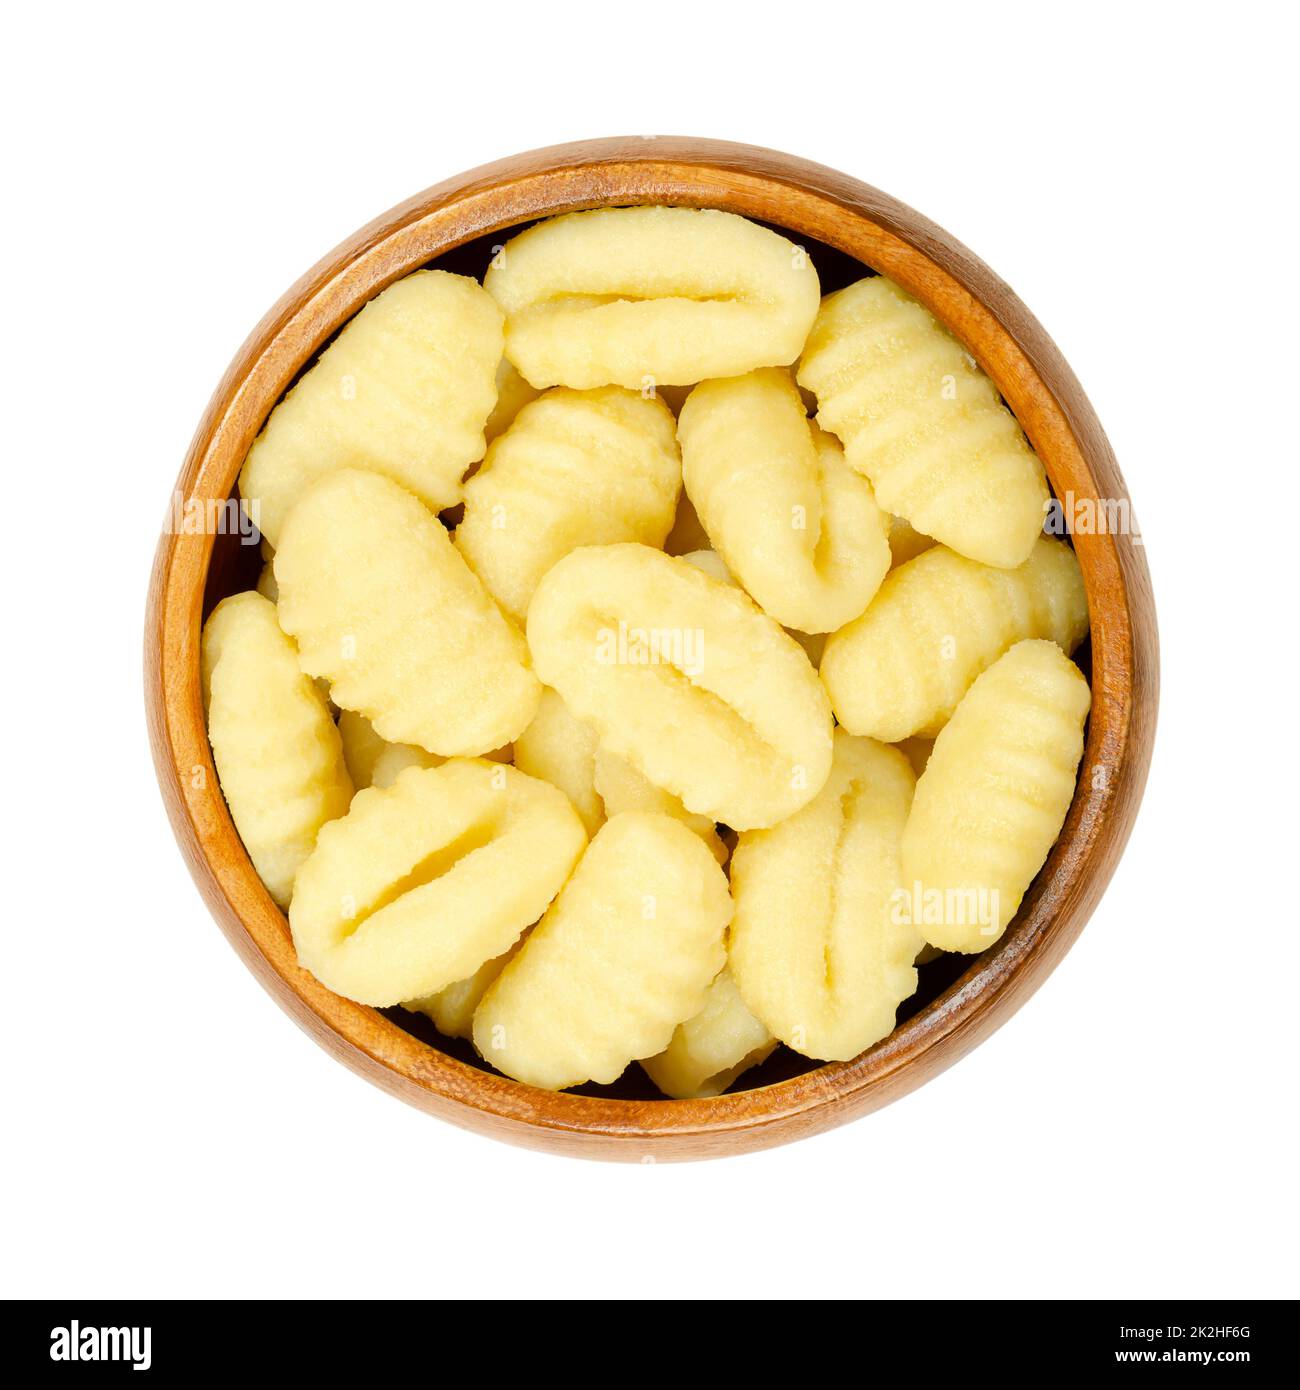 Raw gnocchi, Italian dumplings made of potatoes and flour, in wooden bowl Stock Photo